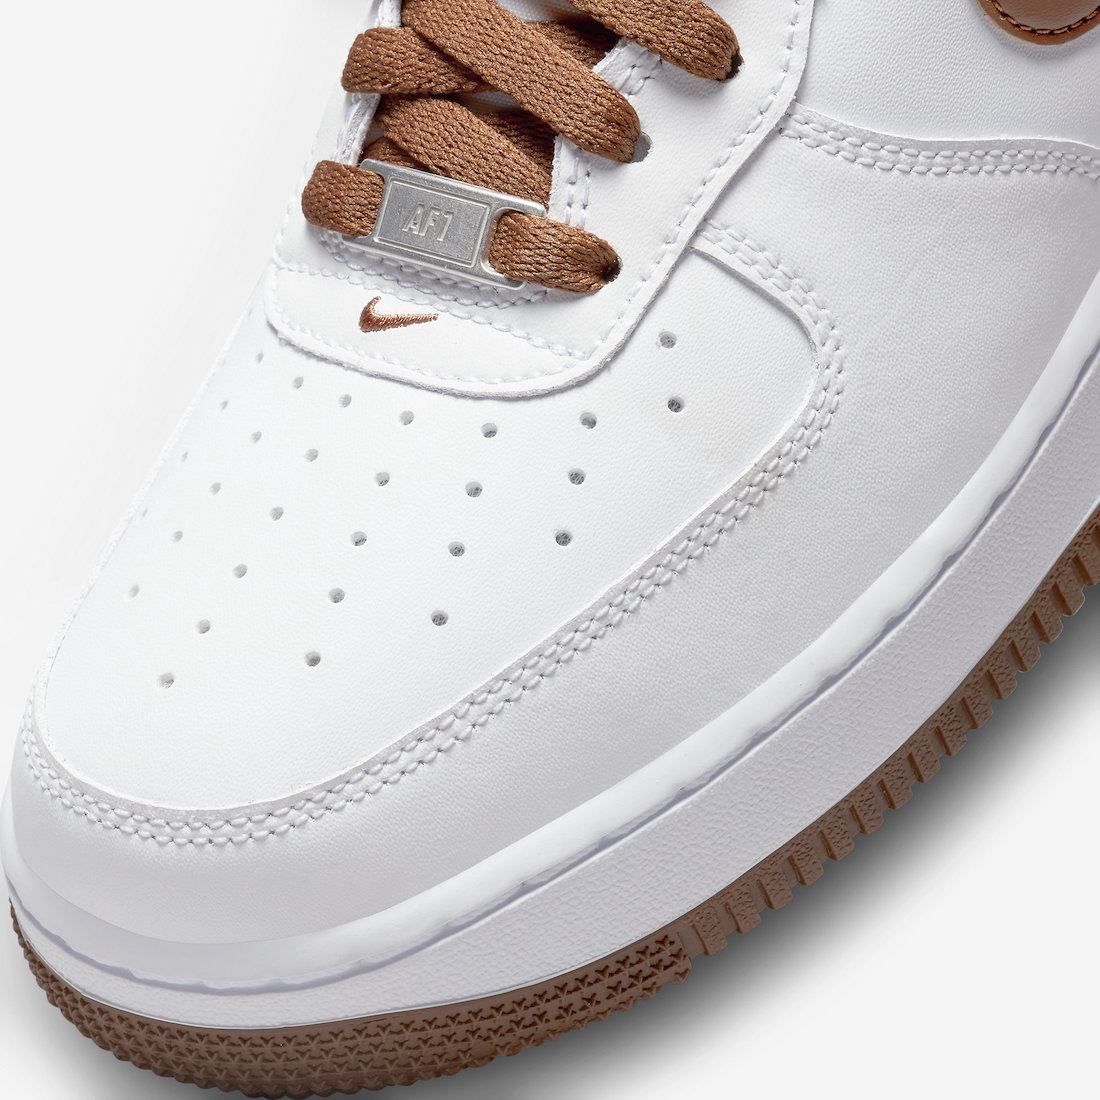 Nike Air Force 1 Low Pecan DH7561-100 Release Date Info